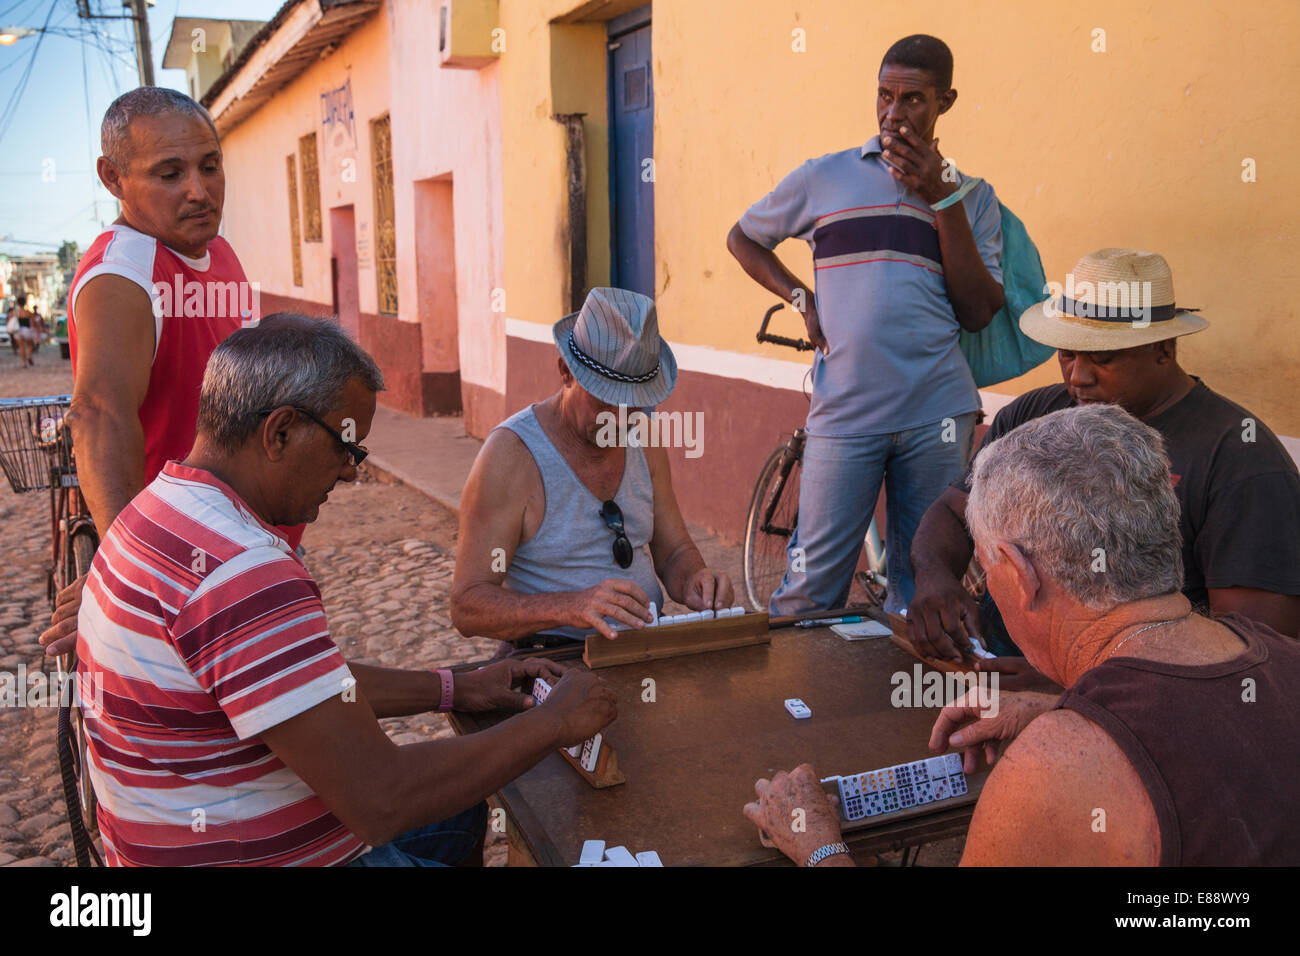 People playing Dominoes in street, Trinidad, Cuba, West Indies, Caribbean, Central America Stock Photo